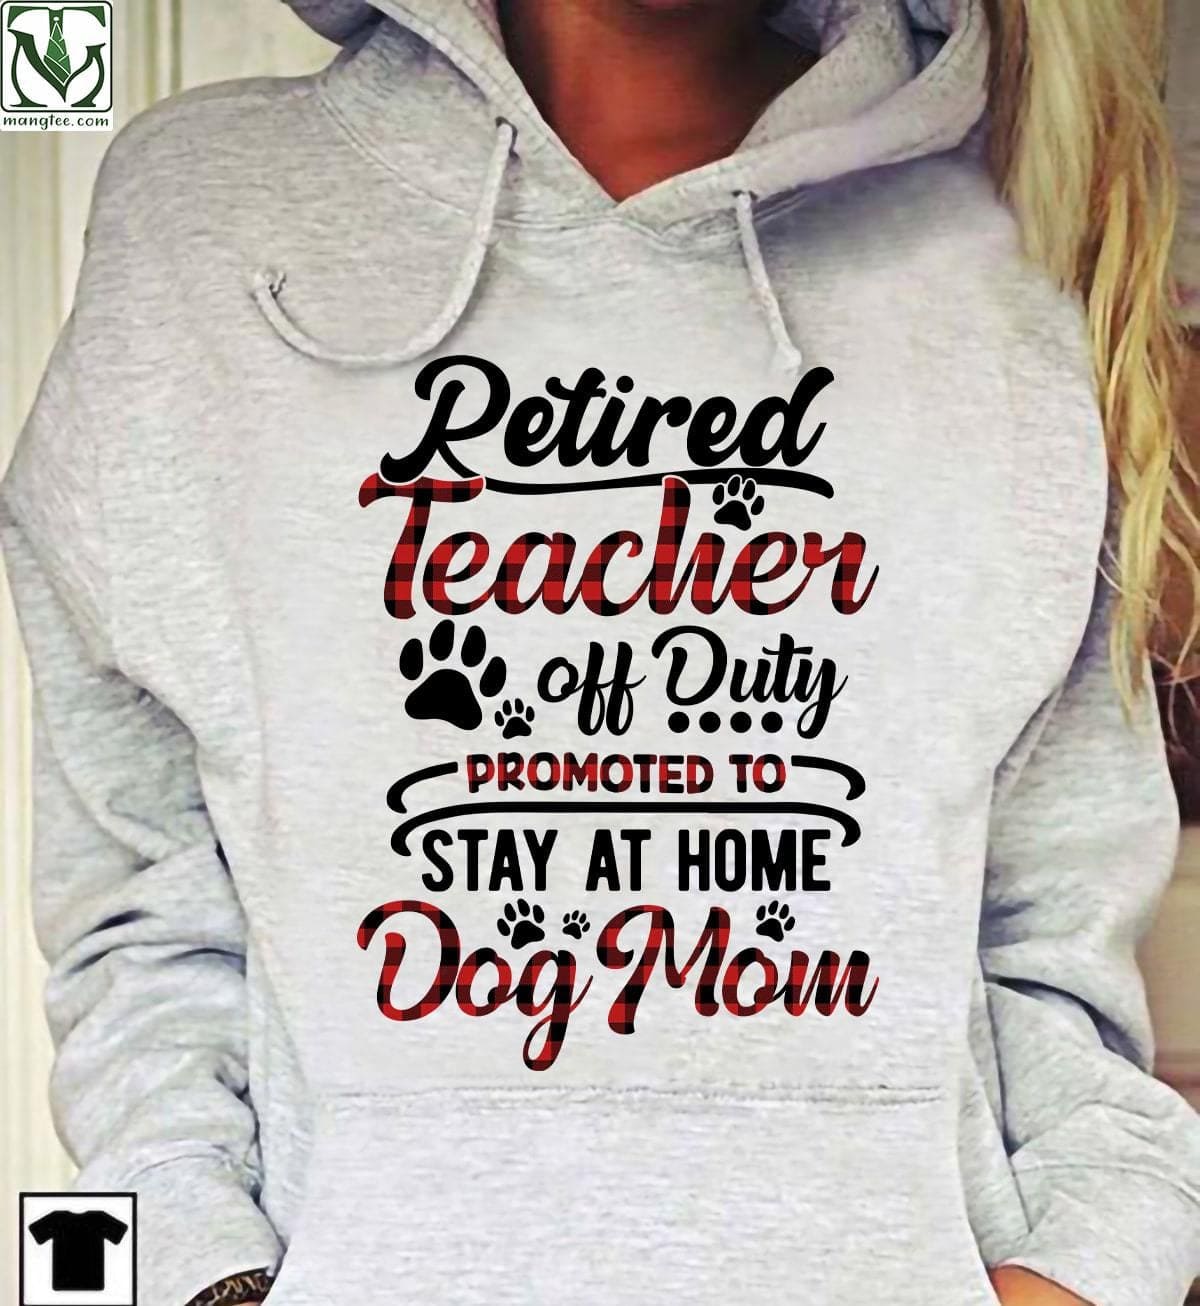 Retired teacher off Duty promoted to stay at home dog mom